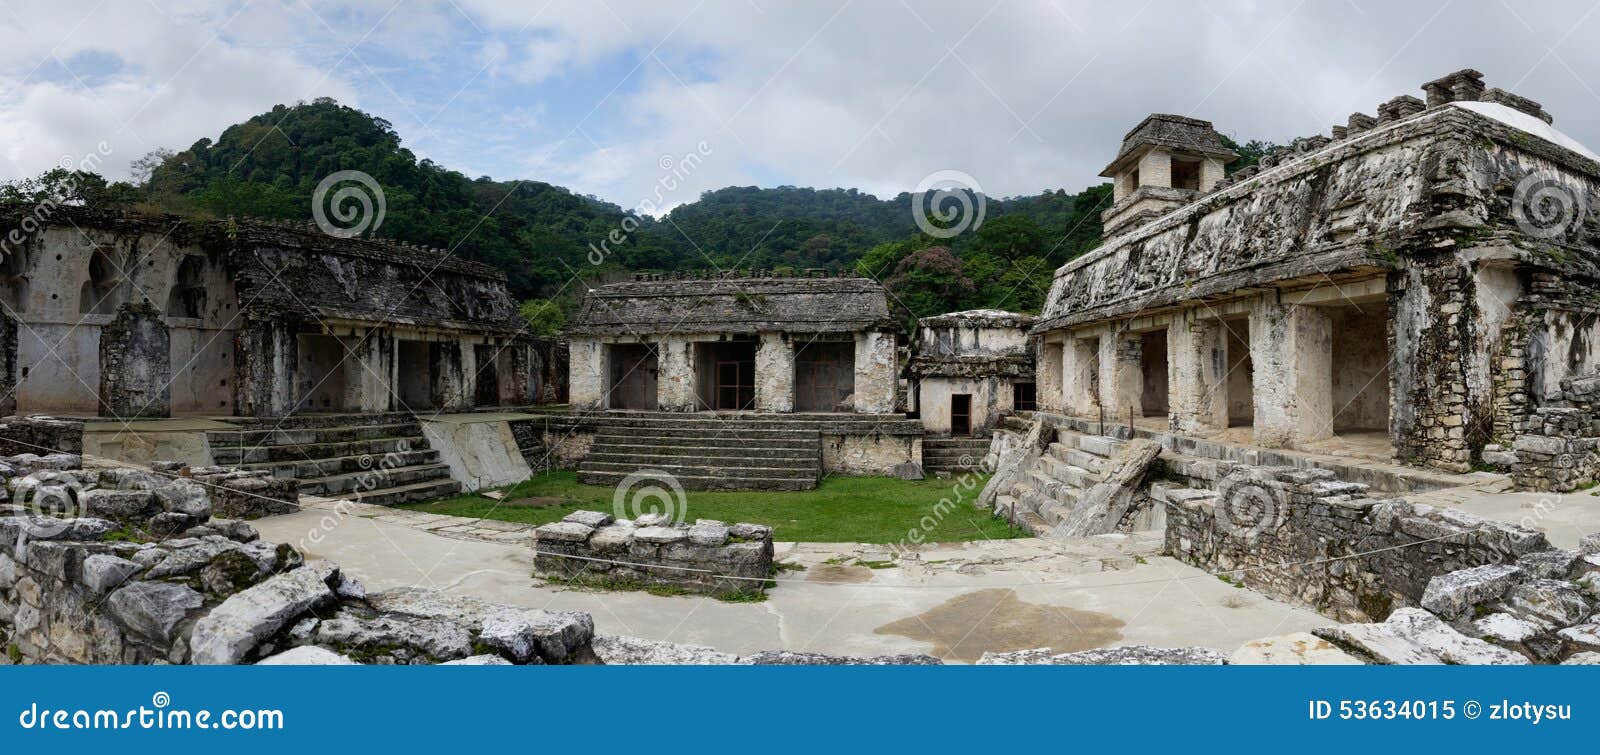 ancient palenque maya archaeological site